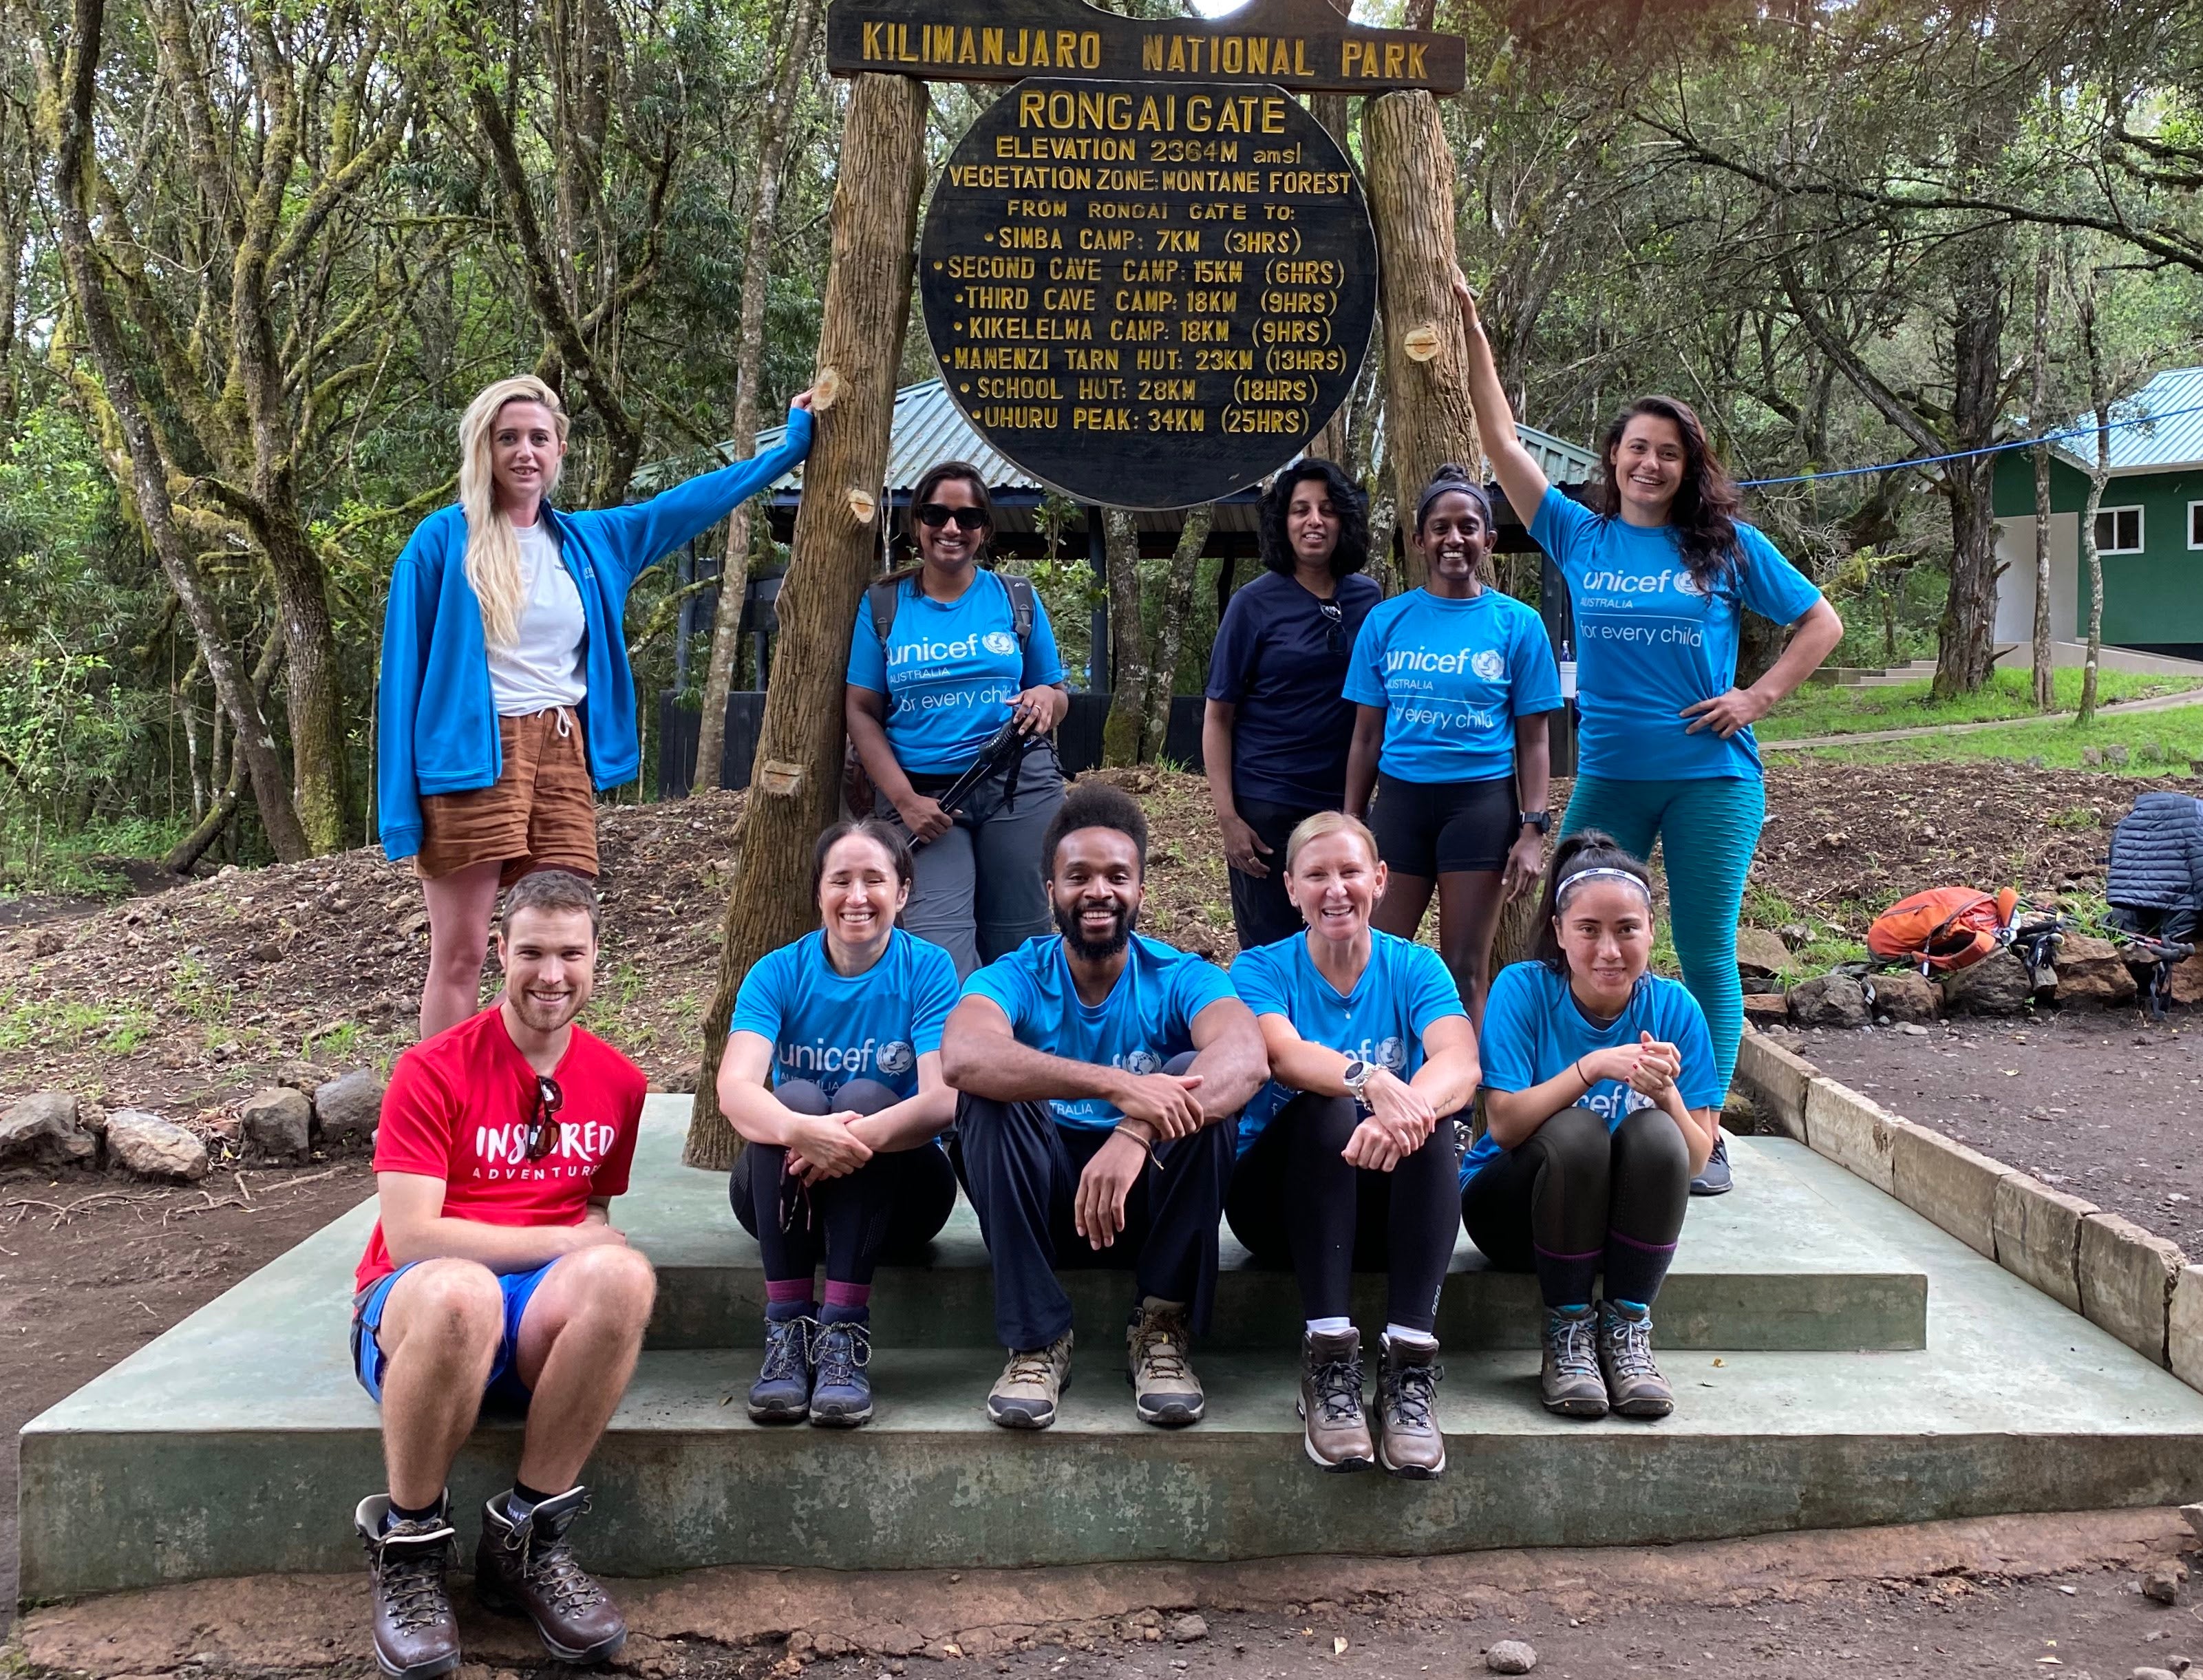 A group of people with UNICEF t-shirts. They are by a Mt. Kilimanjaro sign